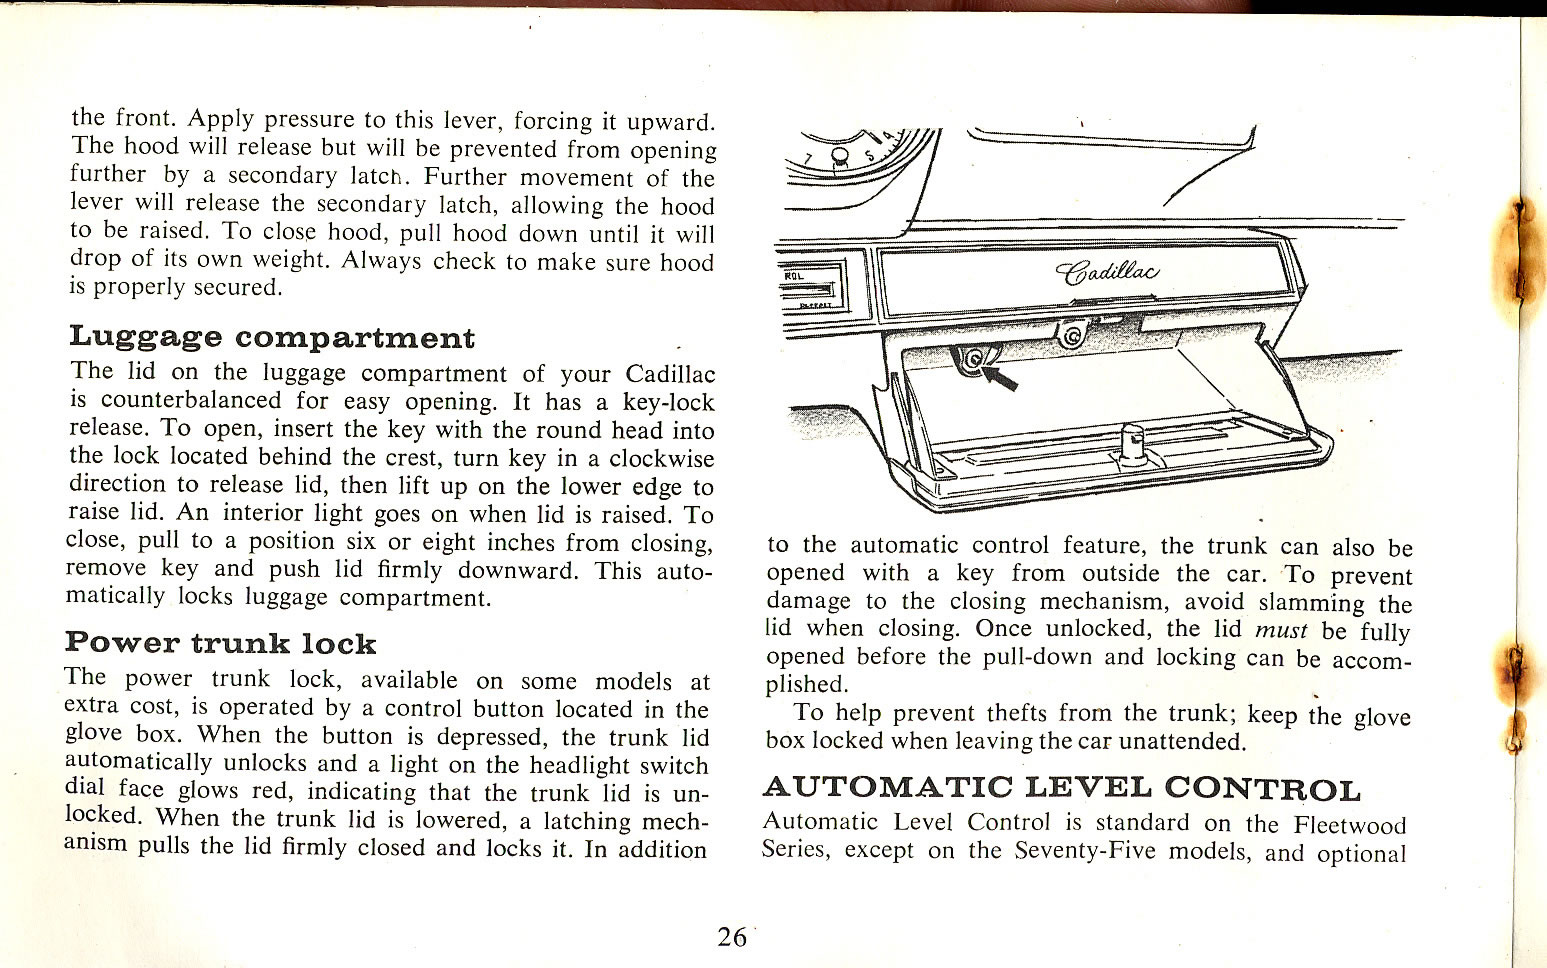 1965 Cadillac Owners Manual Page 32